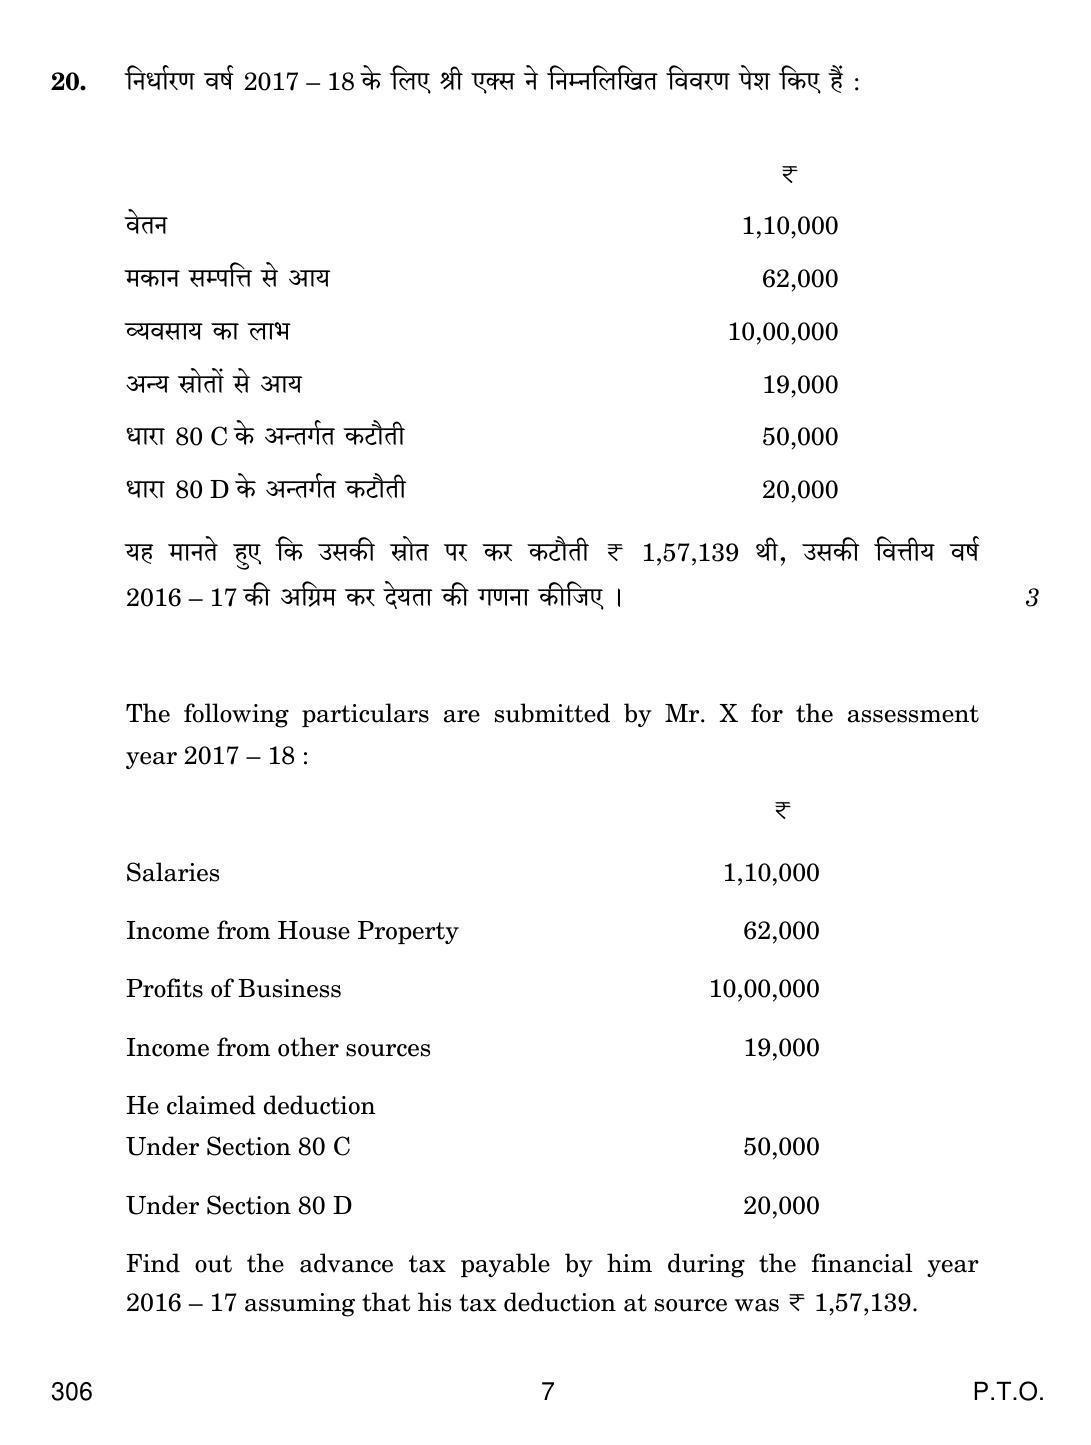 CBSE Class 12 306 TAXATION 2018 Question Paper - Page 7